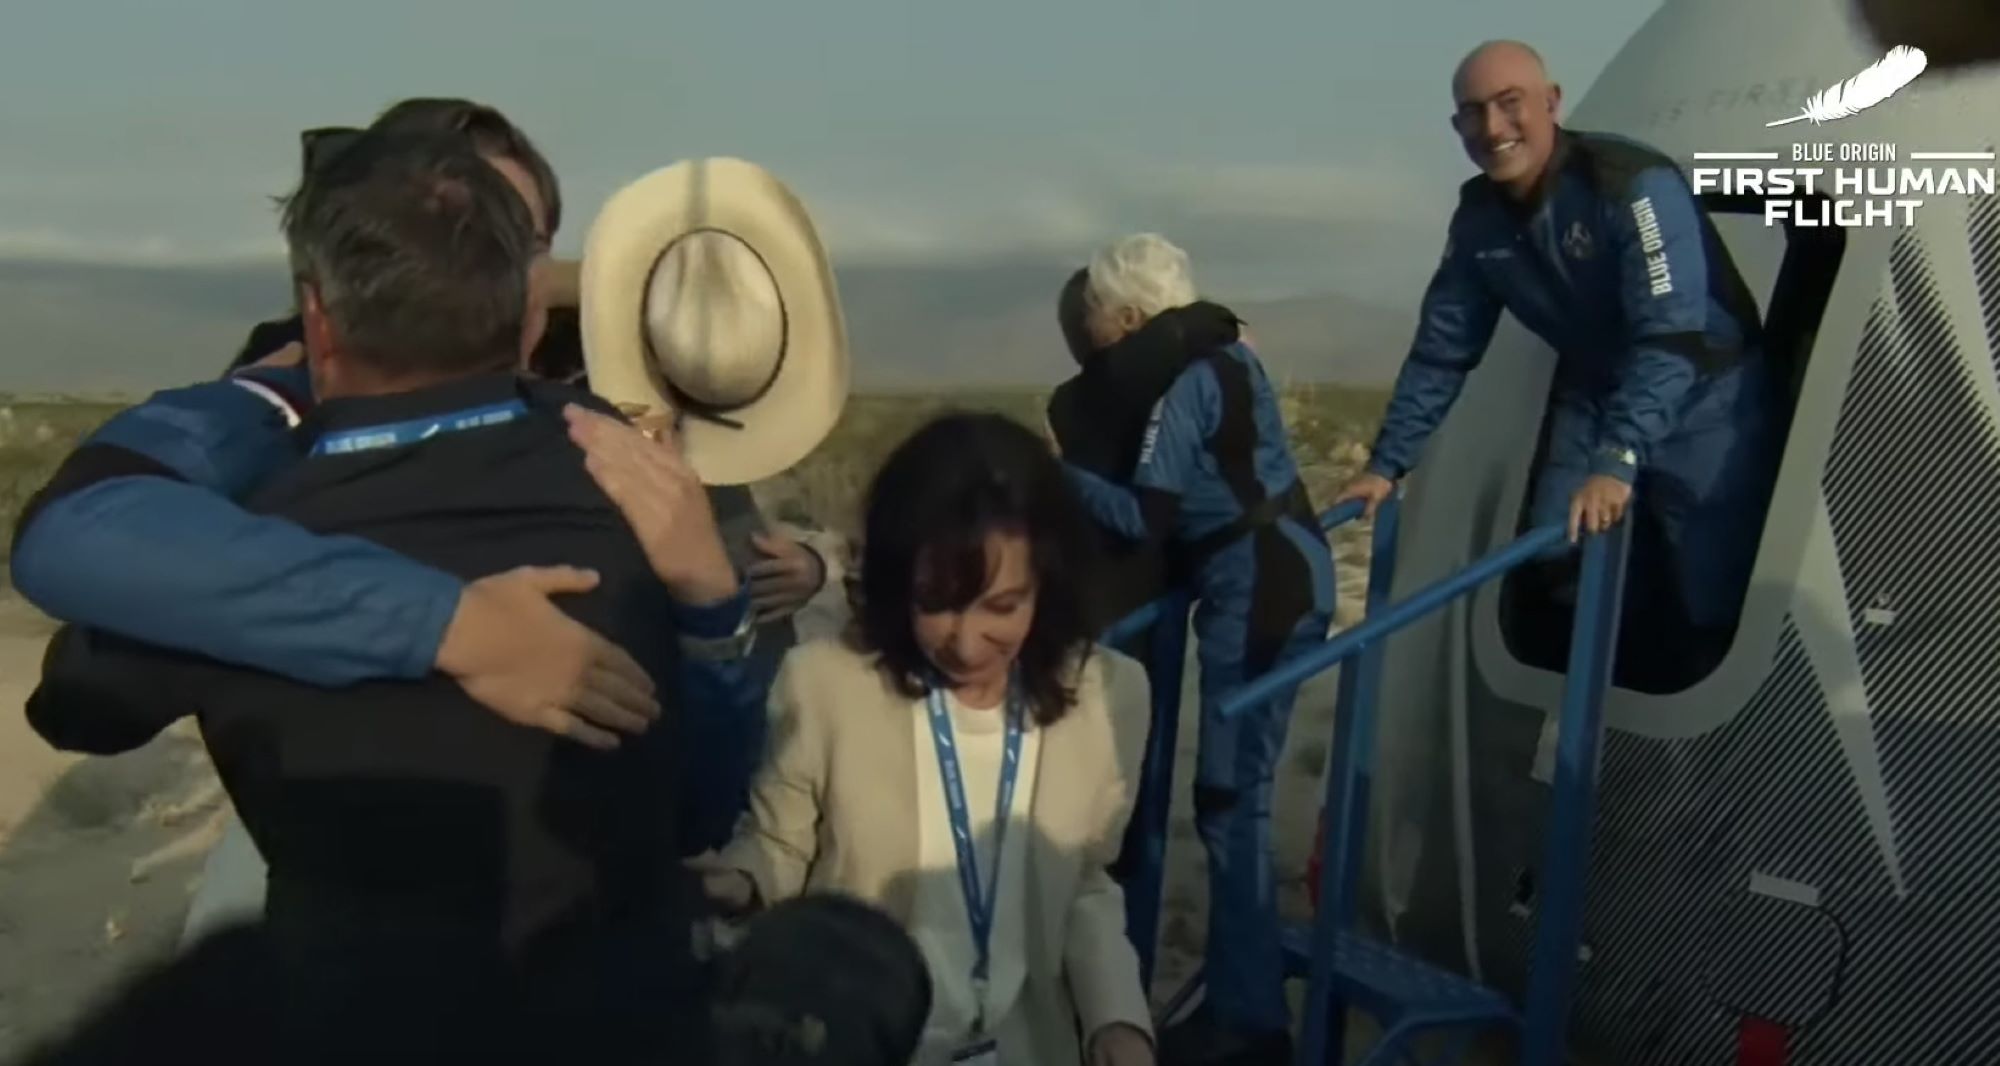 Jeff Bezos coming off the rocket New Shepherd with his crew dressed in space suits.